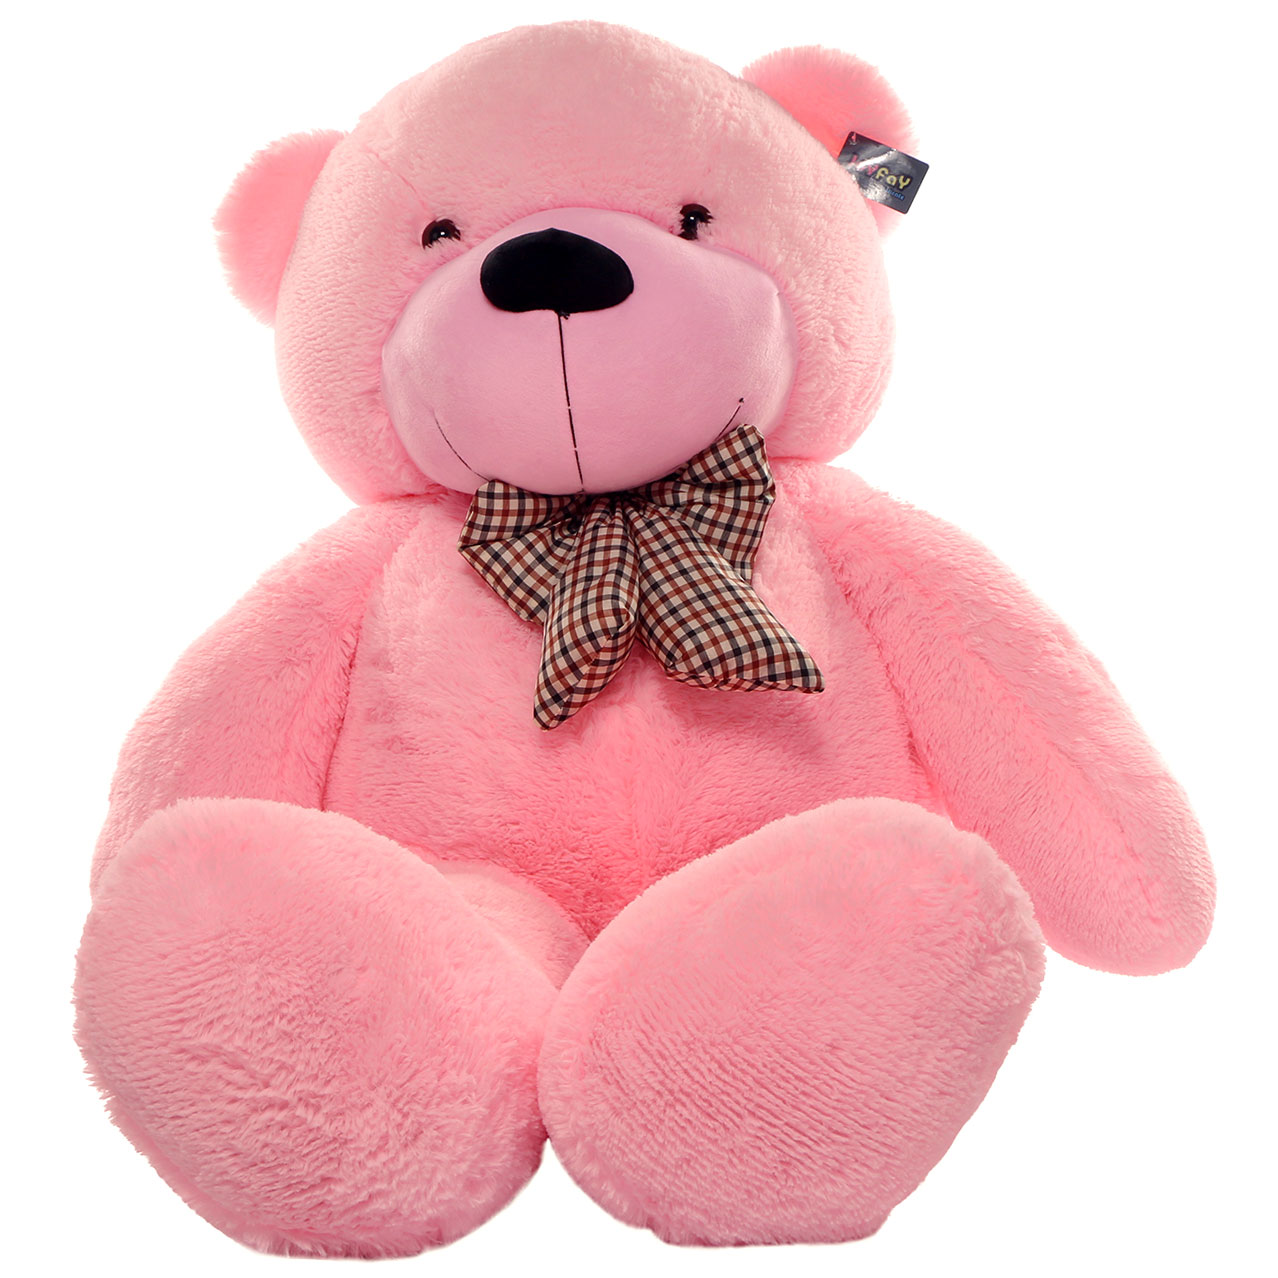 RUBY_TRADERS 3 feet pink teddy bear most beautiful teddy and cute and soft  love teddy